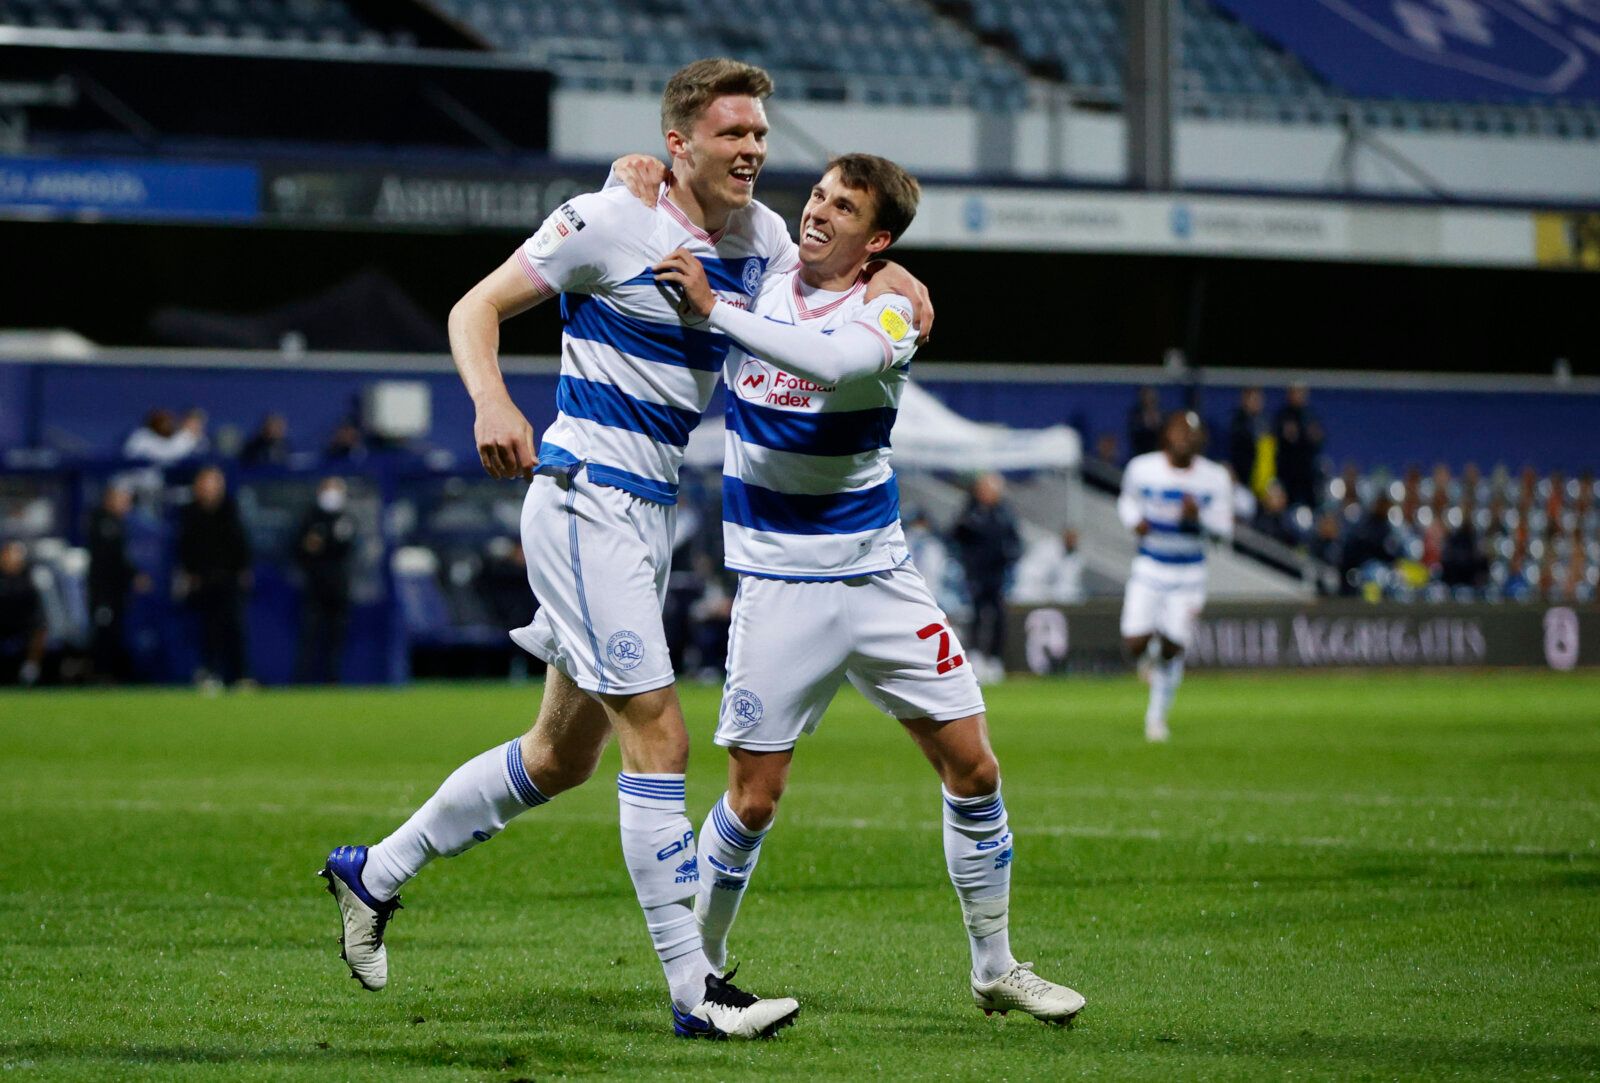 Soccer Football - Championship - Queens Park Rangers v Bristol City - Loftus Road, London, Britain - December 1, 2020 Queens Park Rangers' Rob Dickie celebrates scoring their first goal Action Images/John Sibley EDITORIAL USE ONLY. No use with unauthorized audio, video, data, fixture lists, club/league logos or 'live' services. Online in-match use limited to 75 images, no video emulation. No use in betting, games or single club /league/player publications.  Please contact your account representa